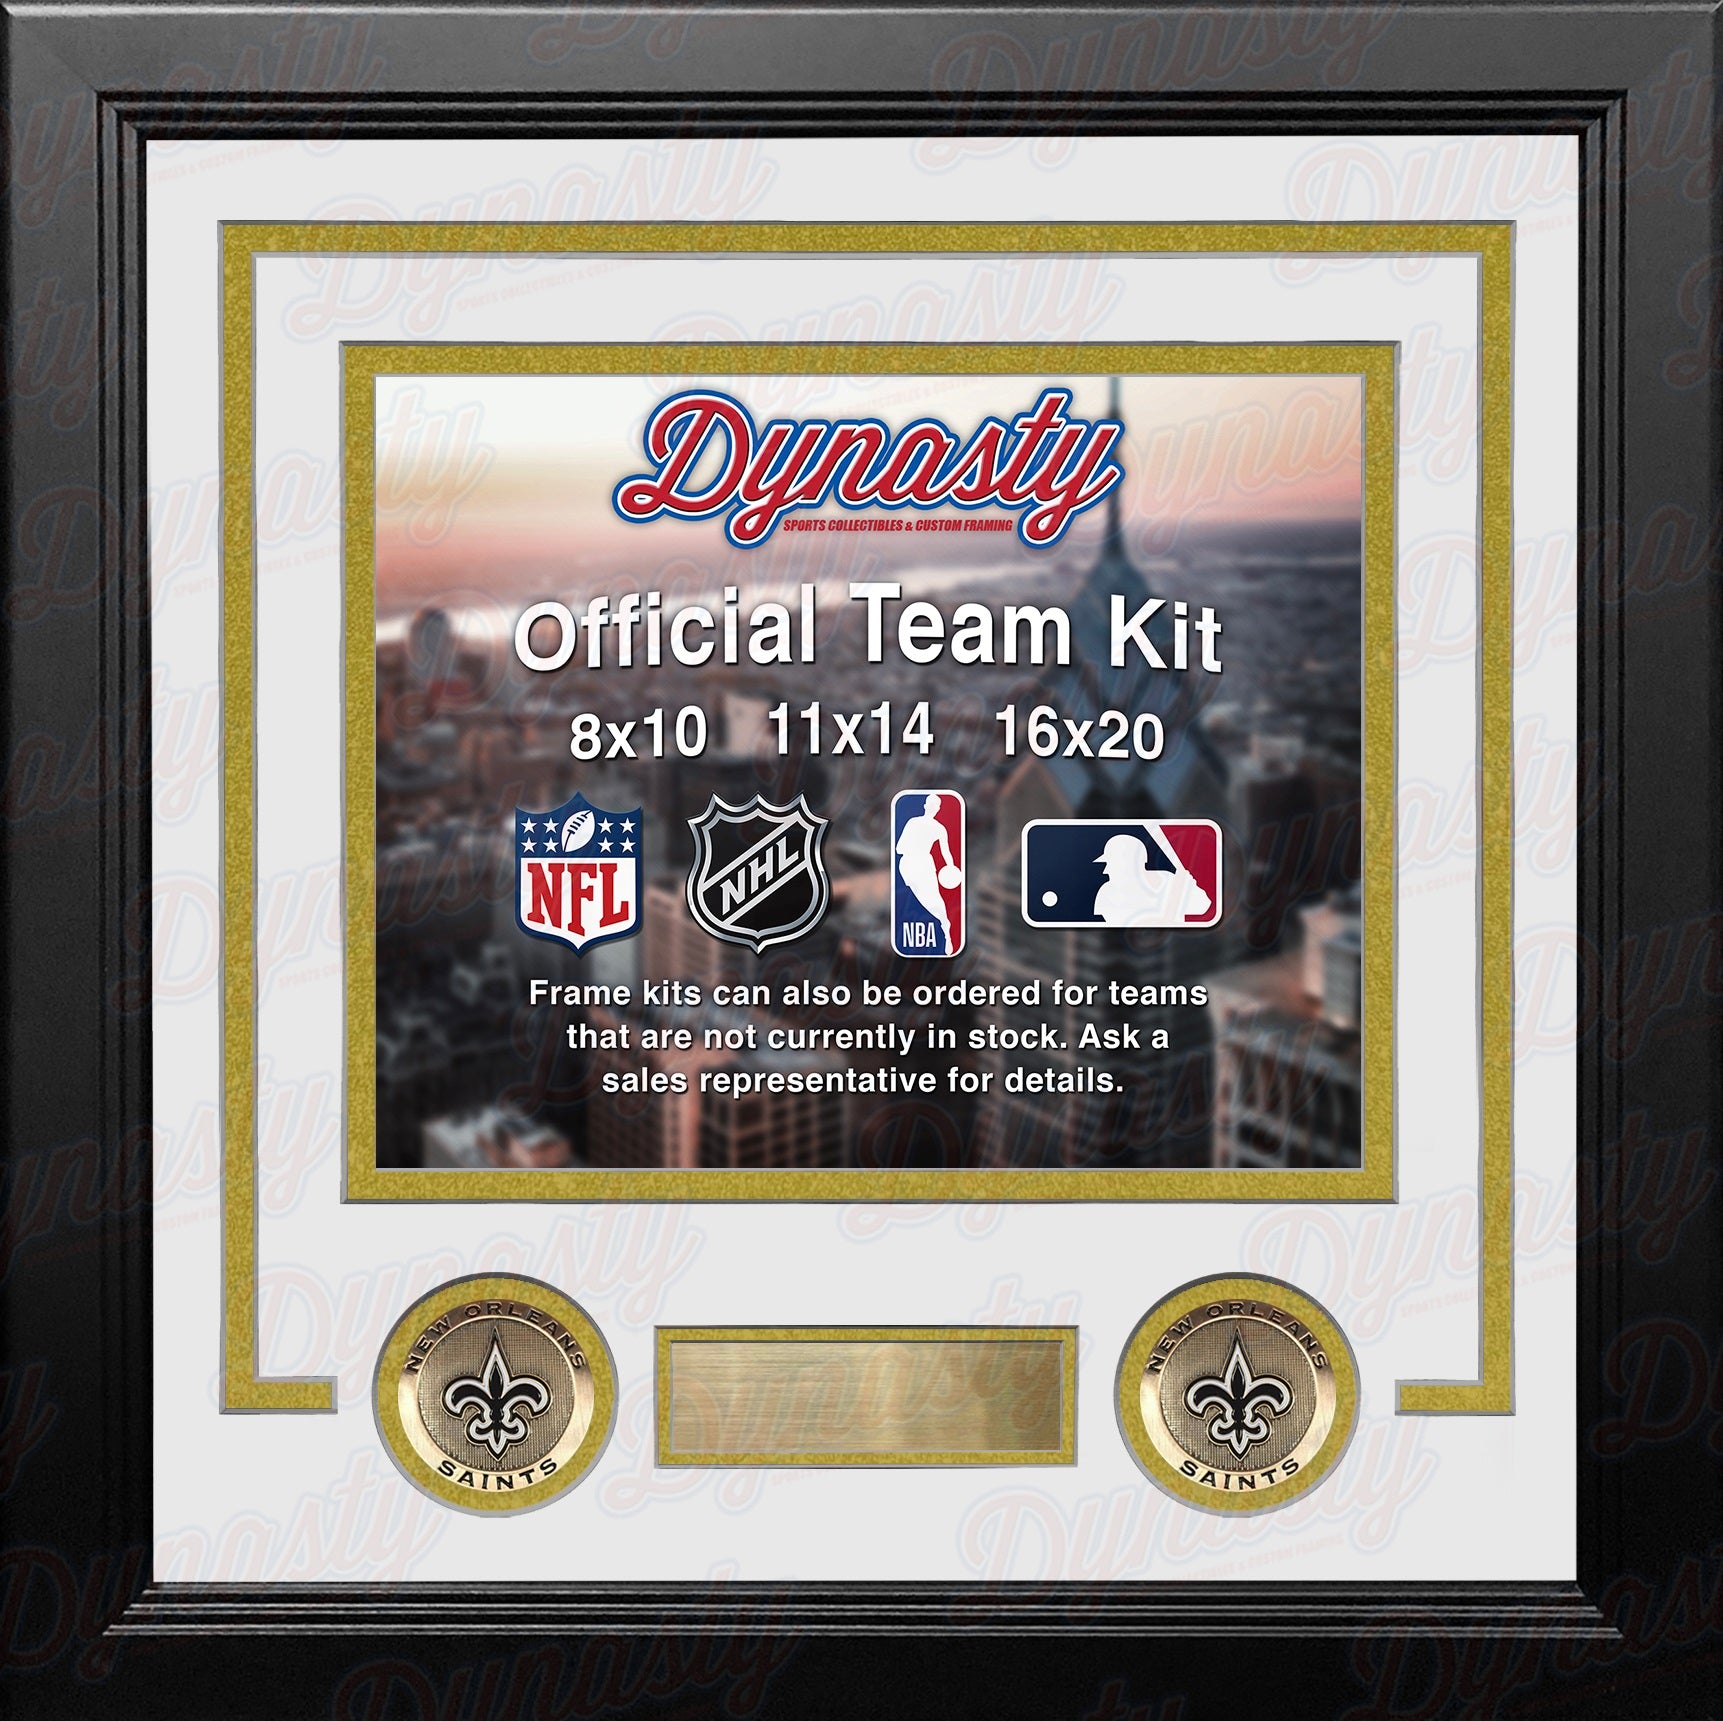 New Orleans Saints Custom NFL Football 11x14 Picture Frame Kit (Multiple Colors) - Dynasty Sports & Framing 